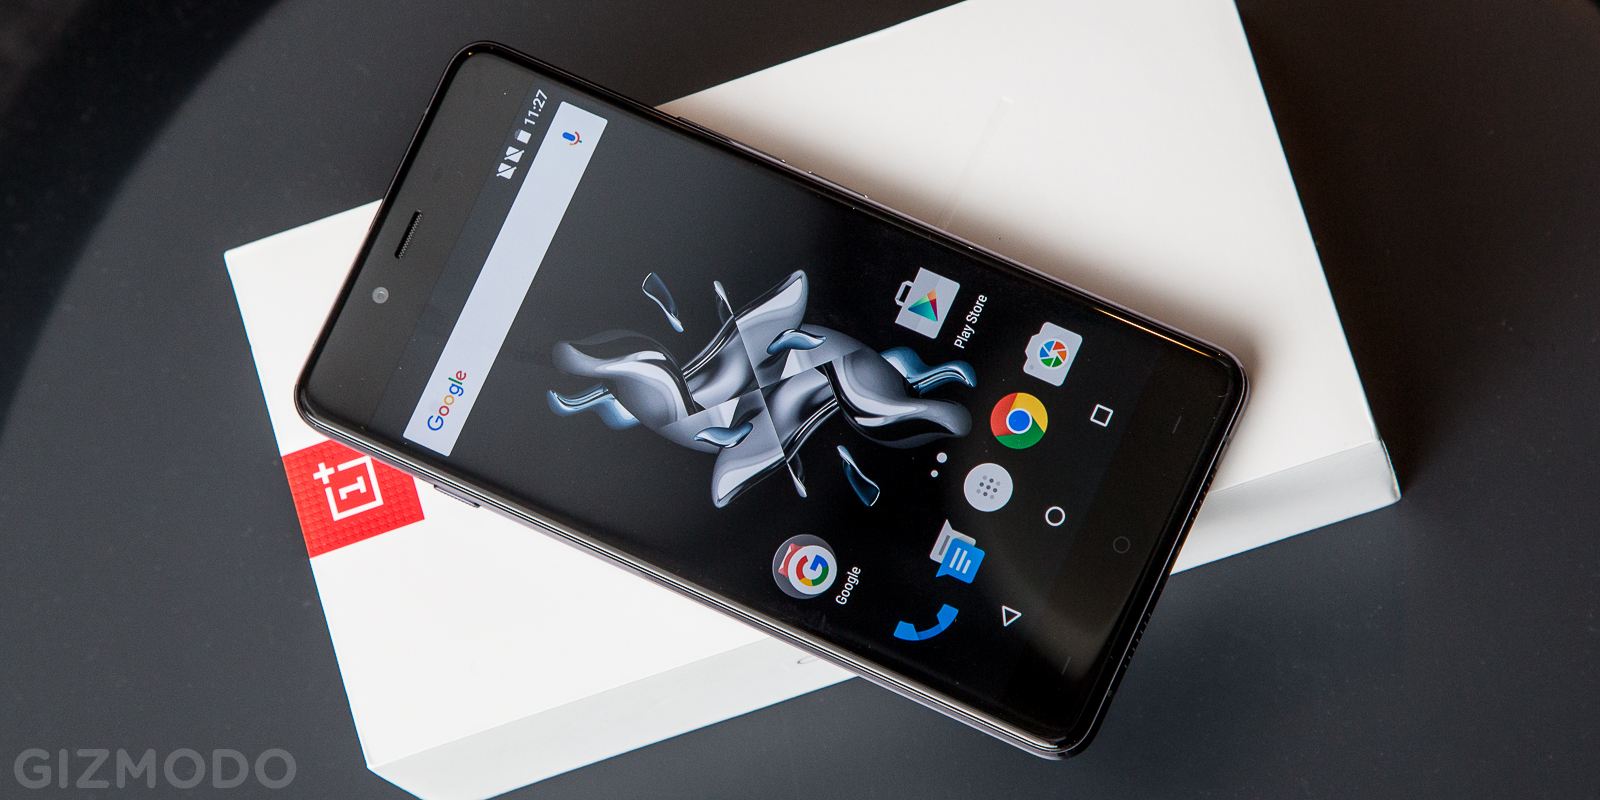 OnePlus X Is A $250 Phone That’s Shockingly Good Looking